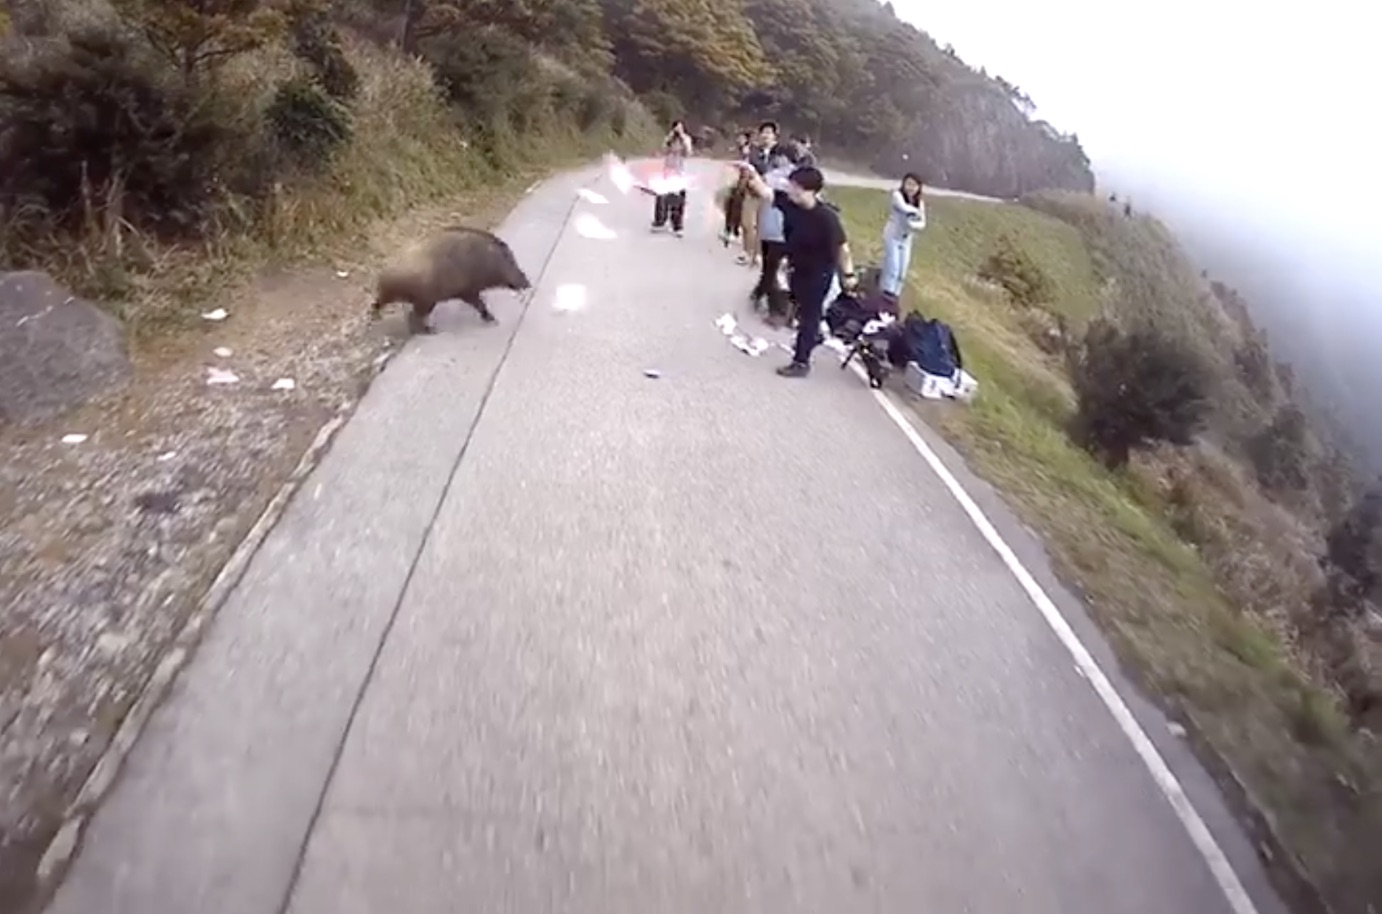 Video of a group of people throwing a plastic bag at a wild boar went viral over the weekend as a whst not to do when you see a wild boar. Screengrab via Facebook video.